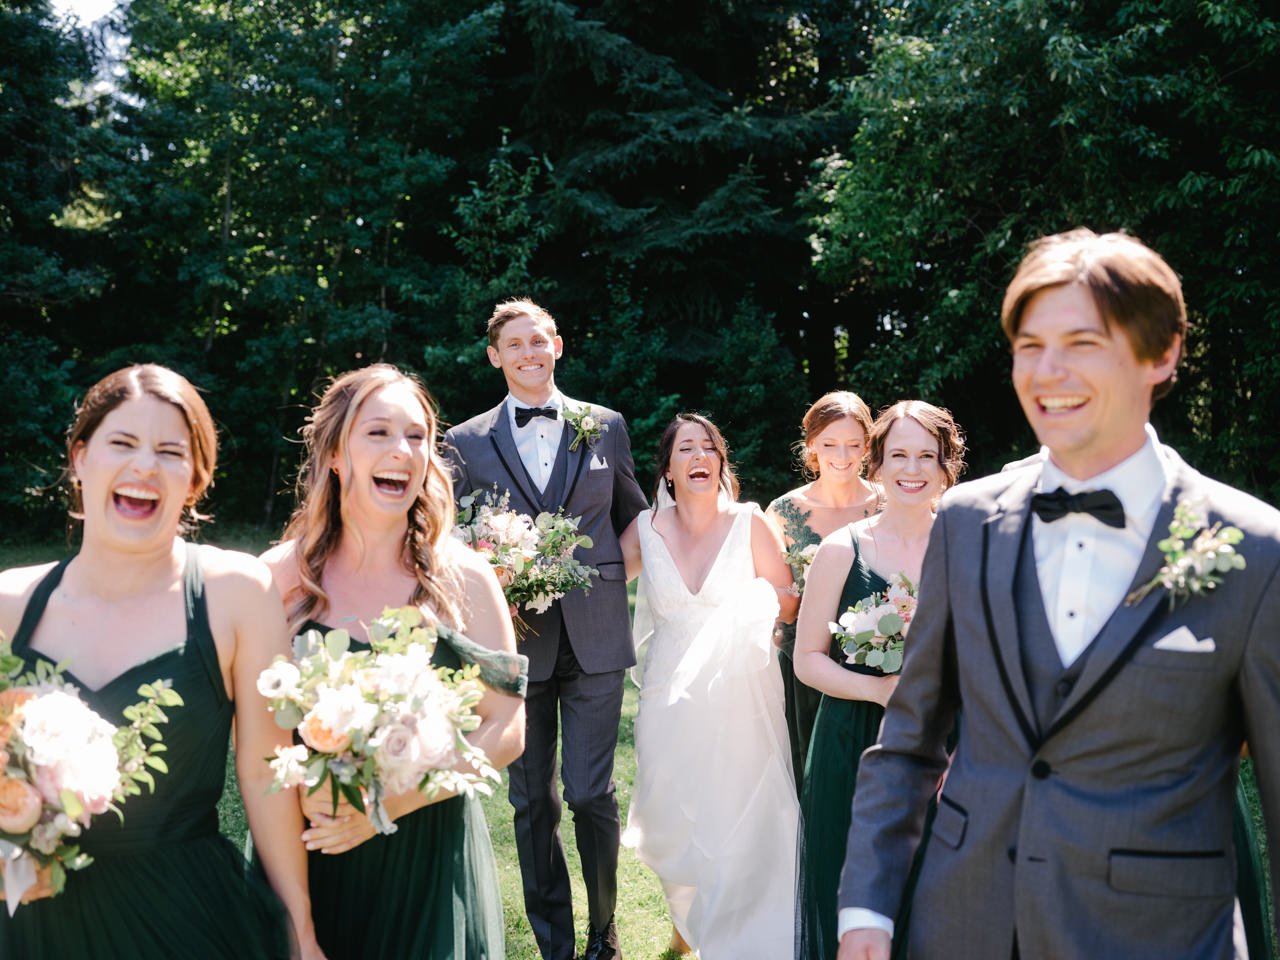  Candid moment of wedding party laughing hard and walking together 